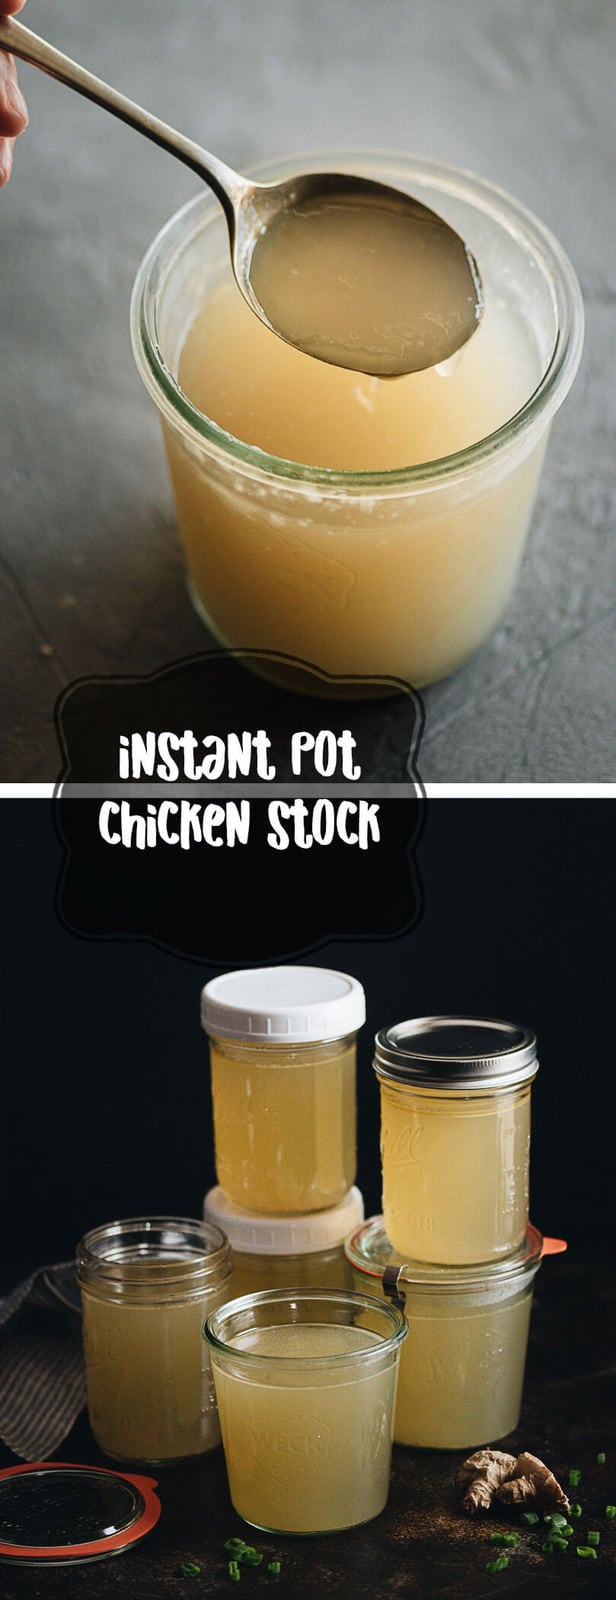 This simple and flavorful pressure cooker chicken stock can be made in a pressure cooker in just an hour. #recipes #chicken #glutenfree